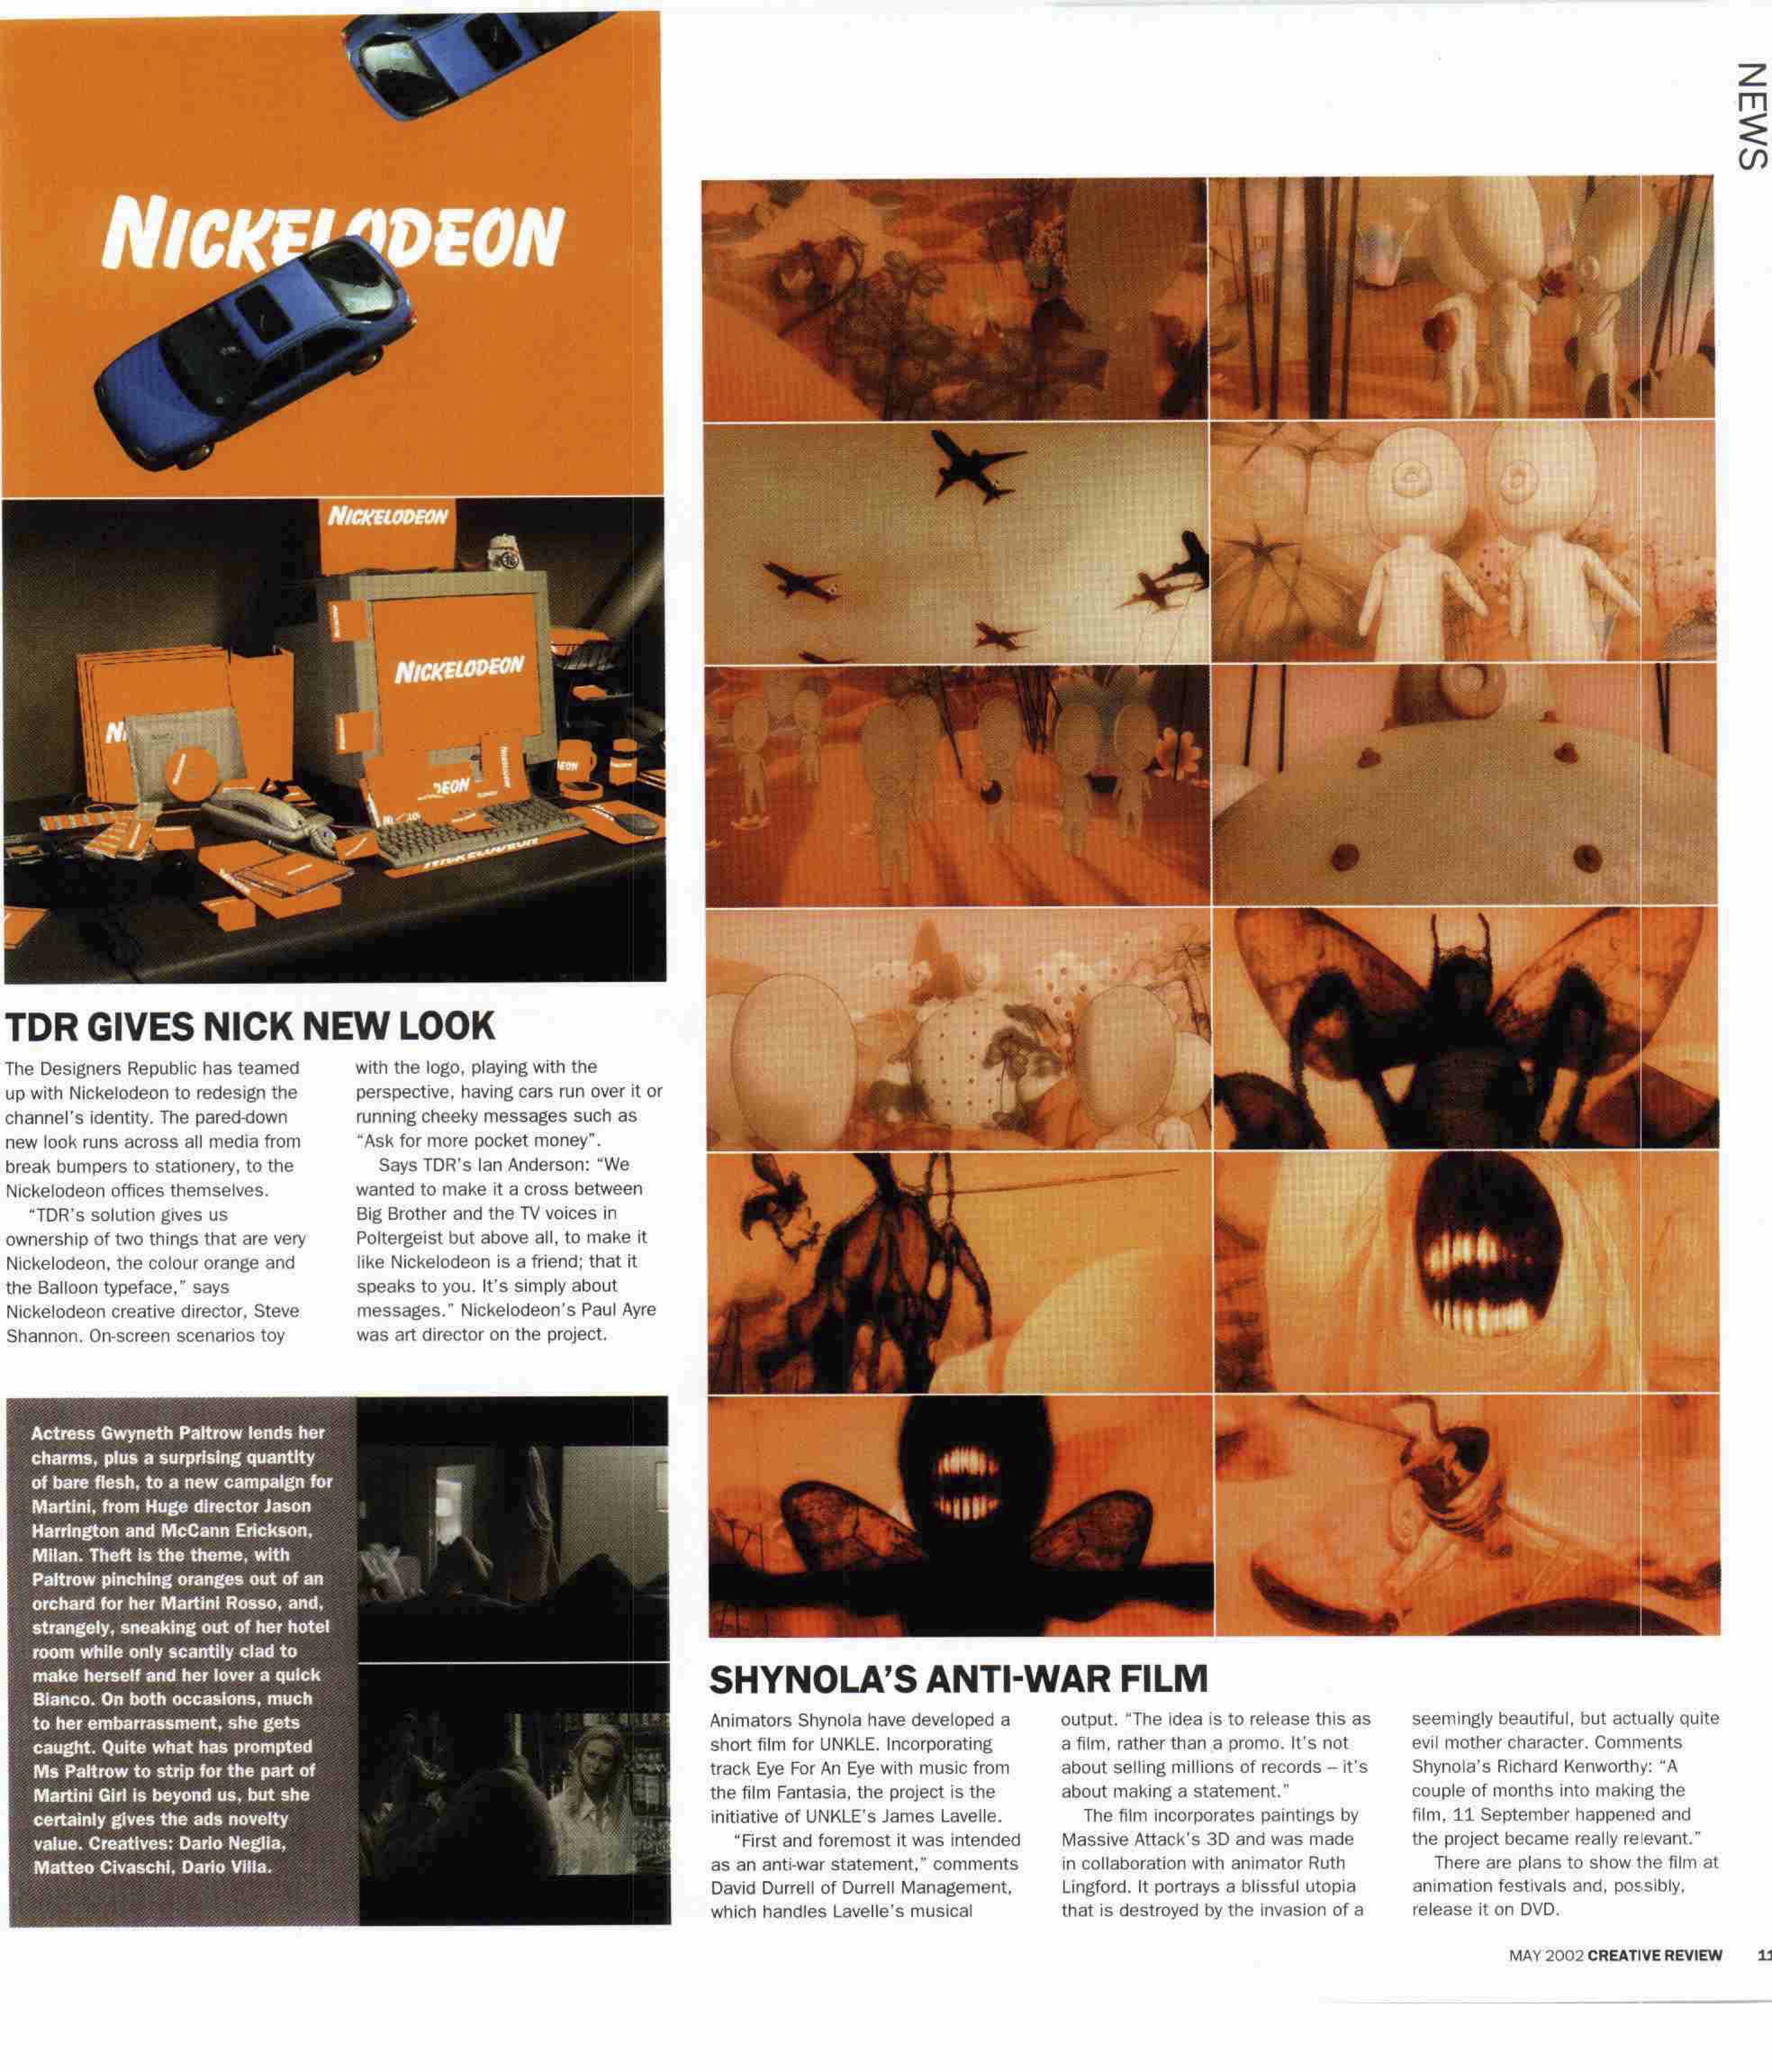 File:Creative Review May 2002 Vol 22 Issue 5 p11.jpg